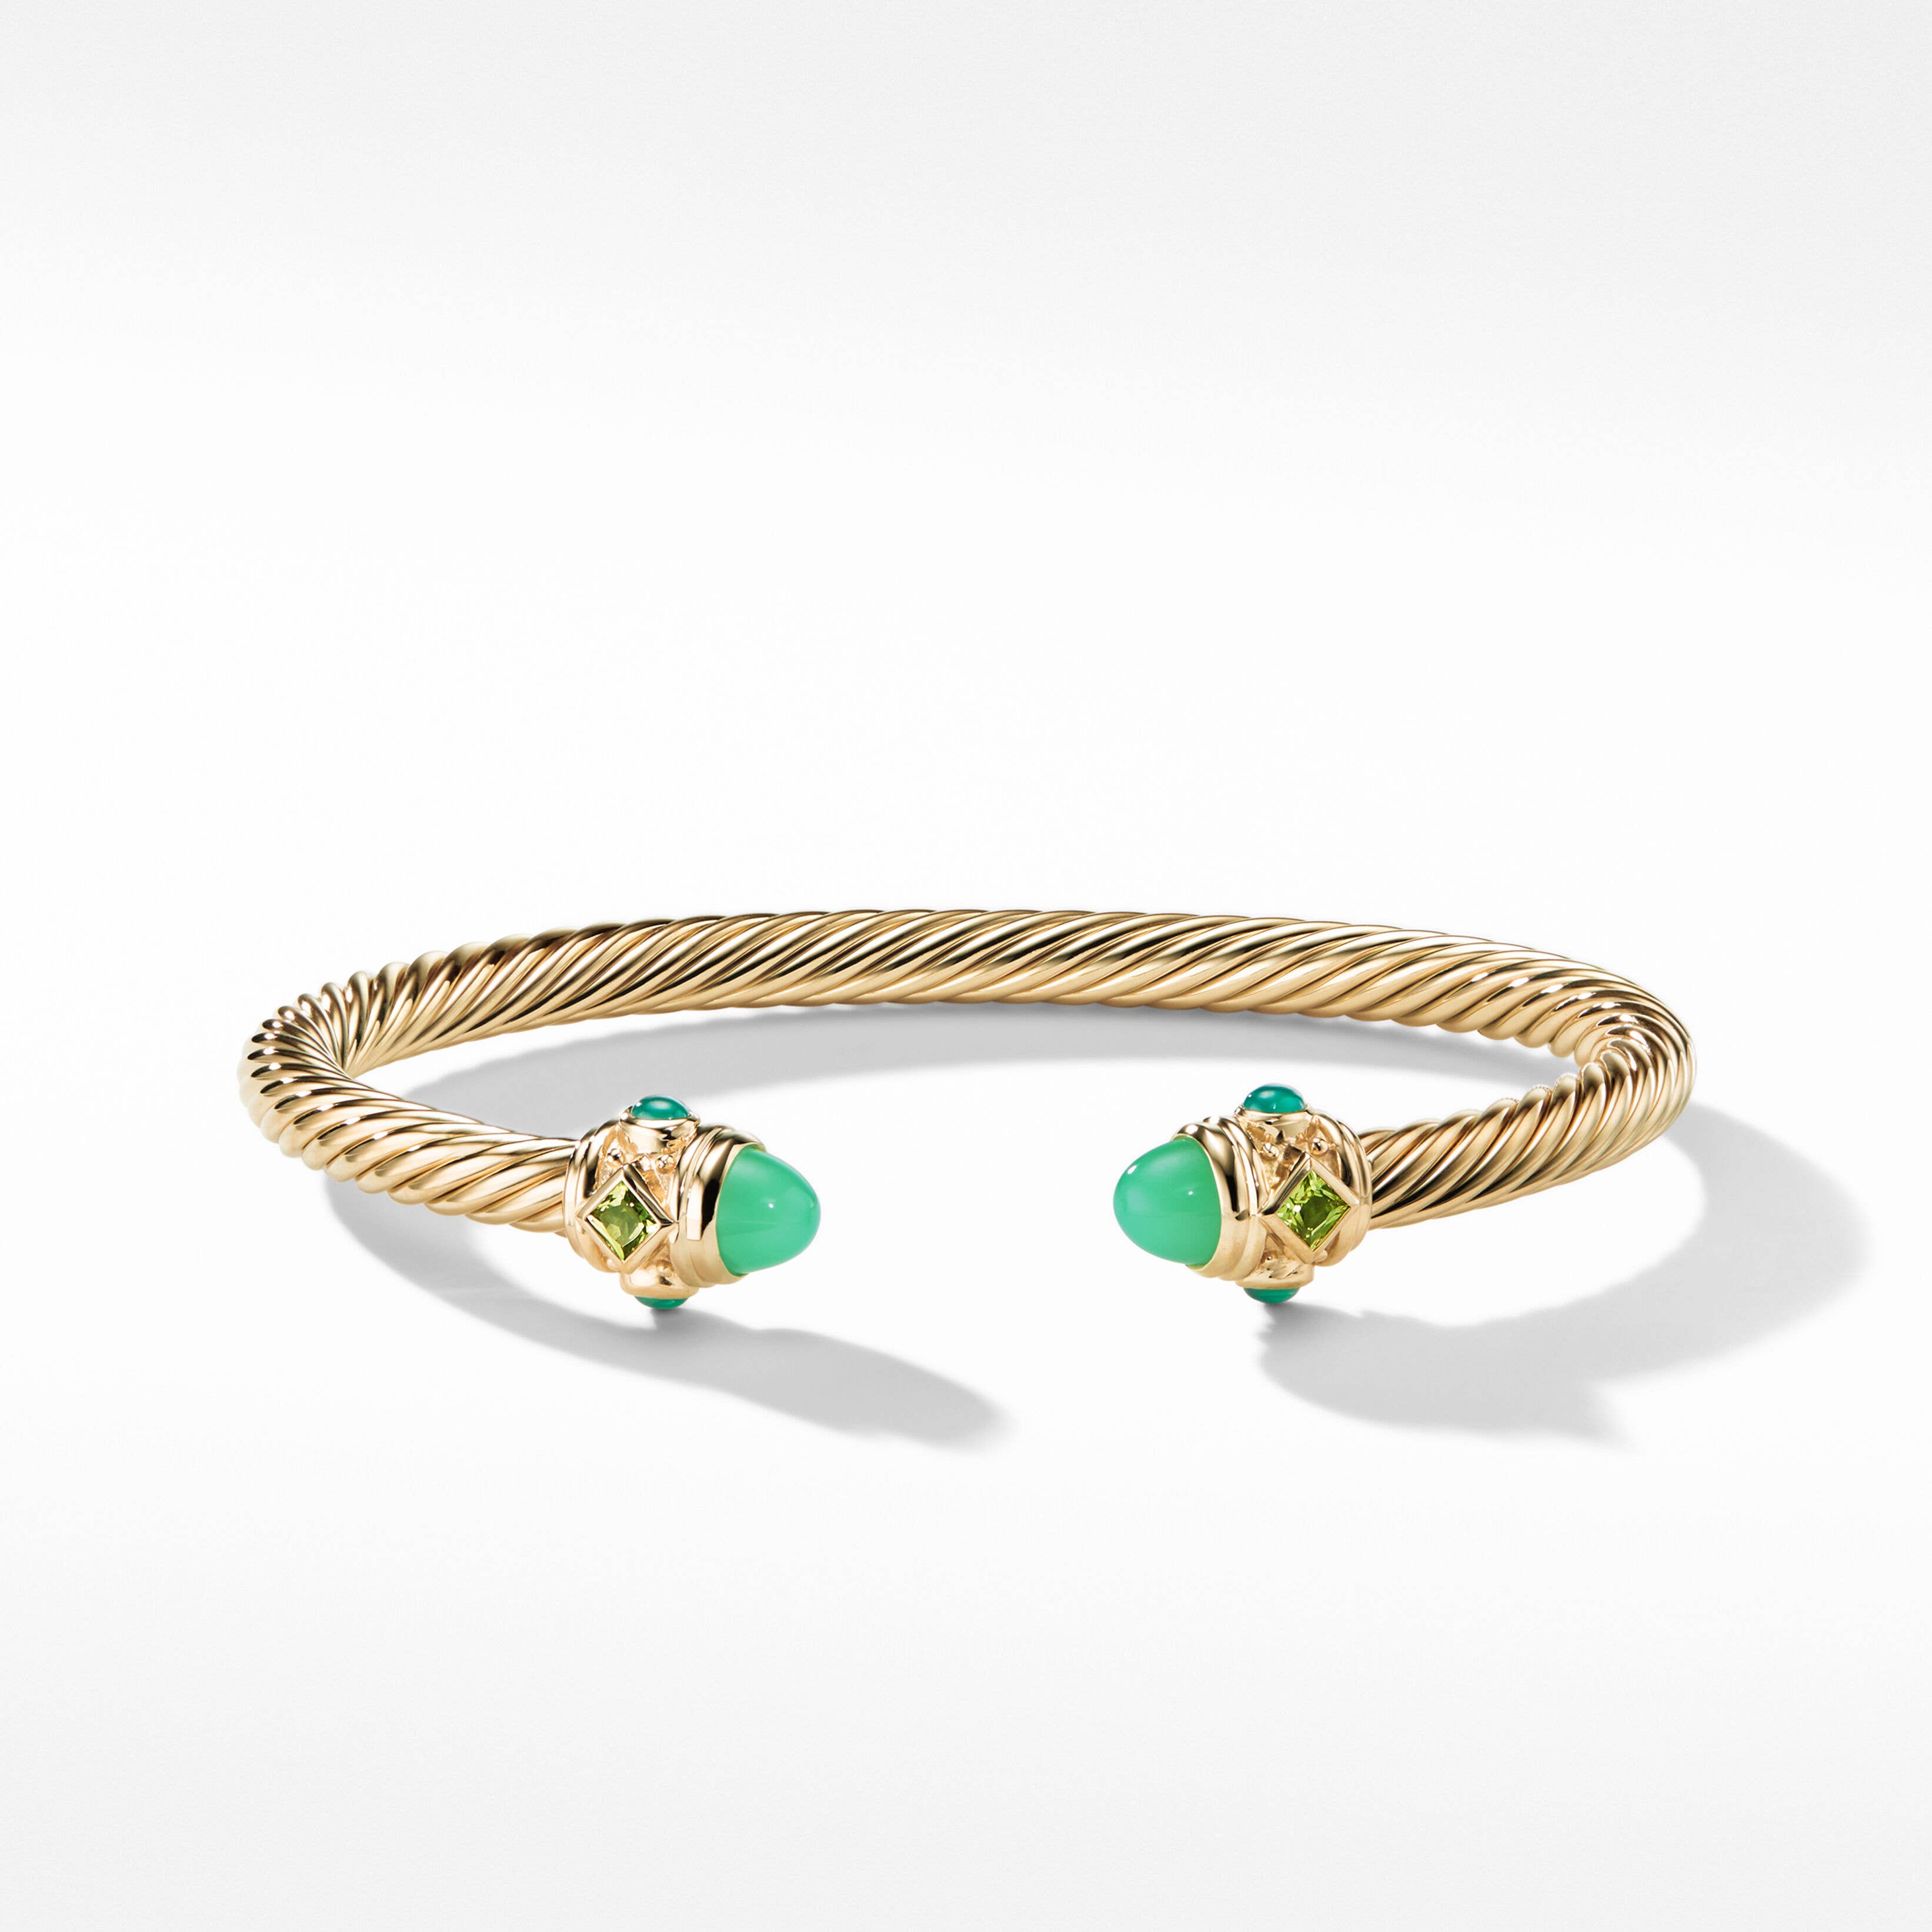 Renaissance Colour Bracelet in 18K Yellow Gold with Chrysoprase, Peridot and Green Onyx